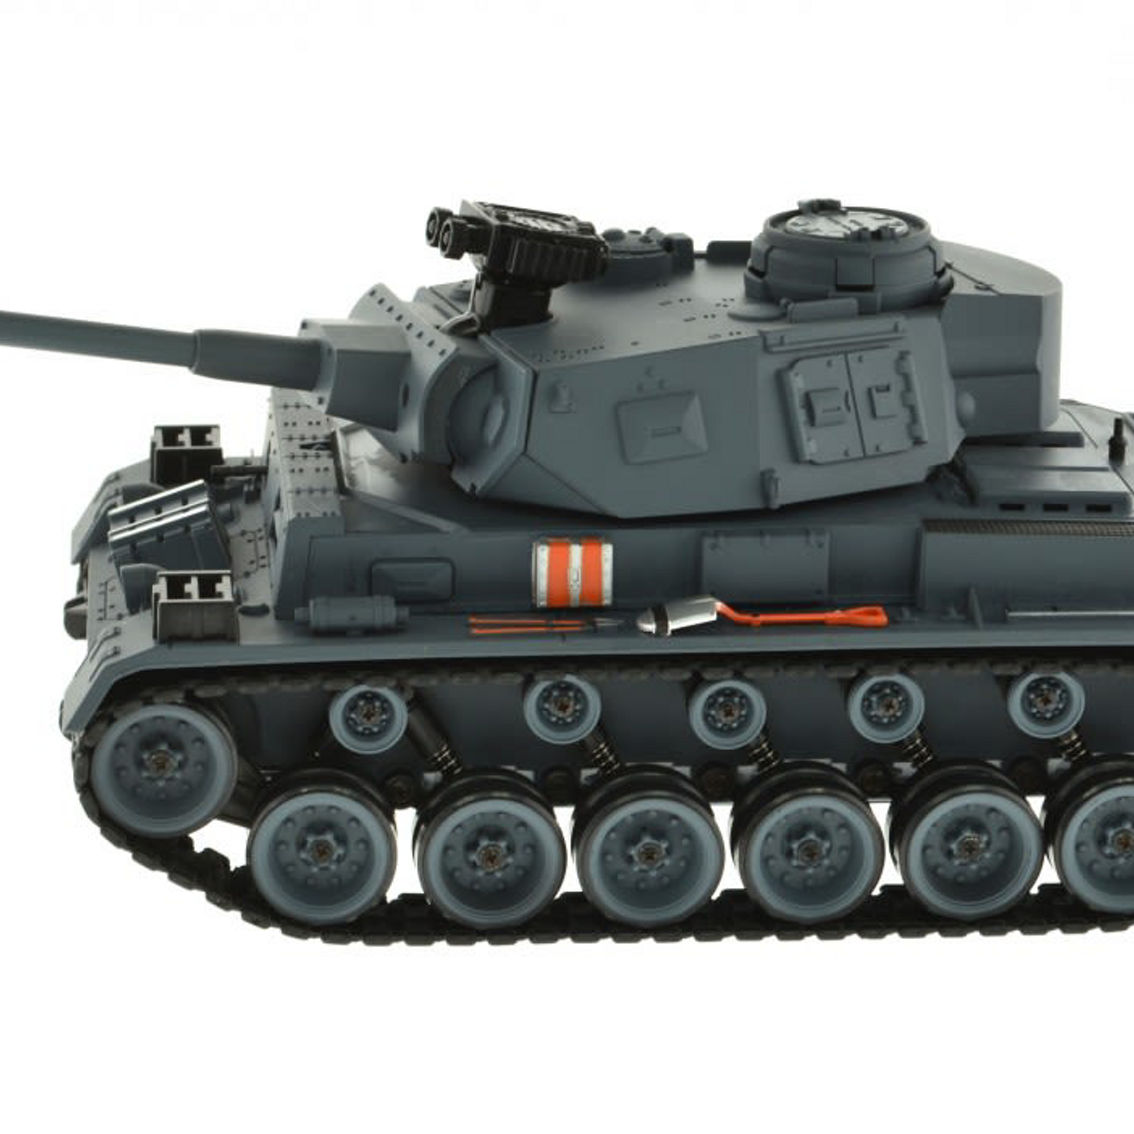 CIS-YZ-827 1:18 scale WWII German Panther III tank with lights sound and BB gun - Image 2 of 5